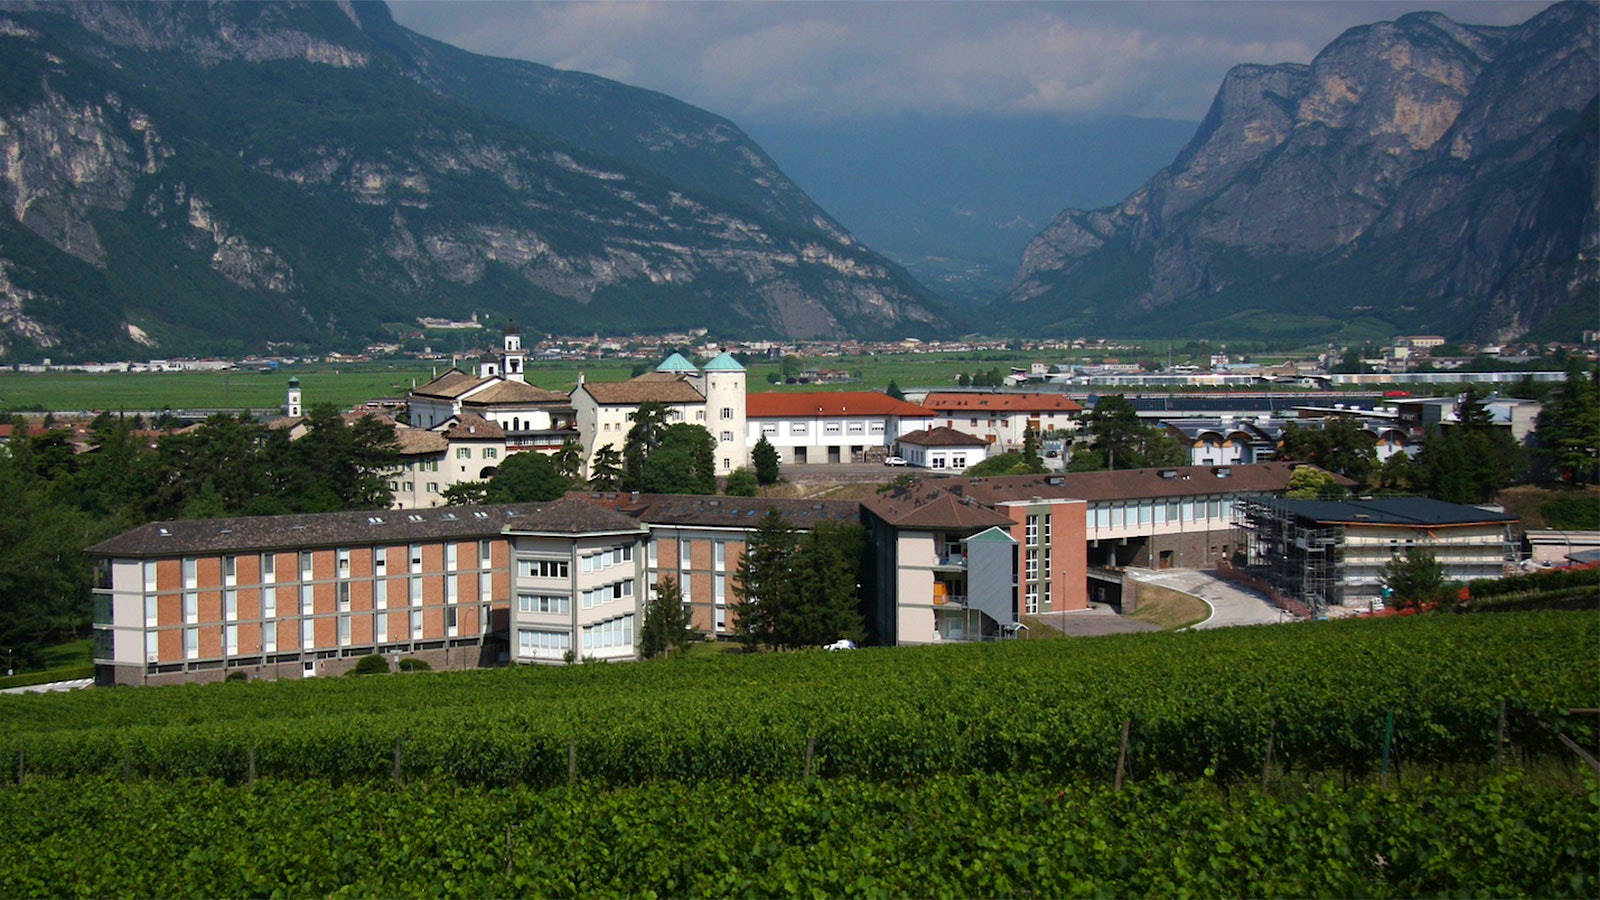  The Edmund Mach Foundation building in Trentino, Italy.